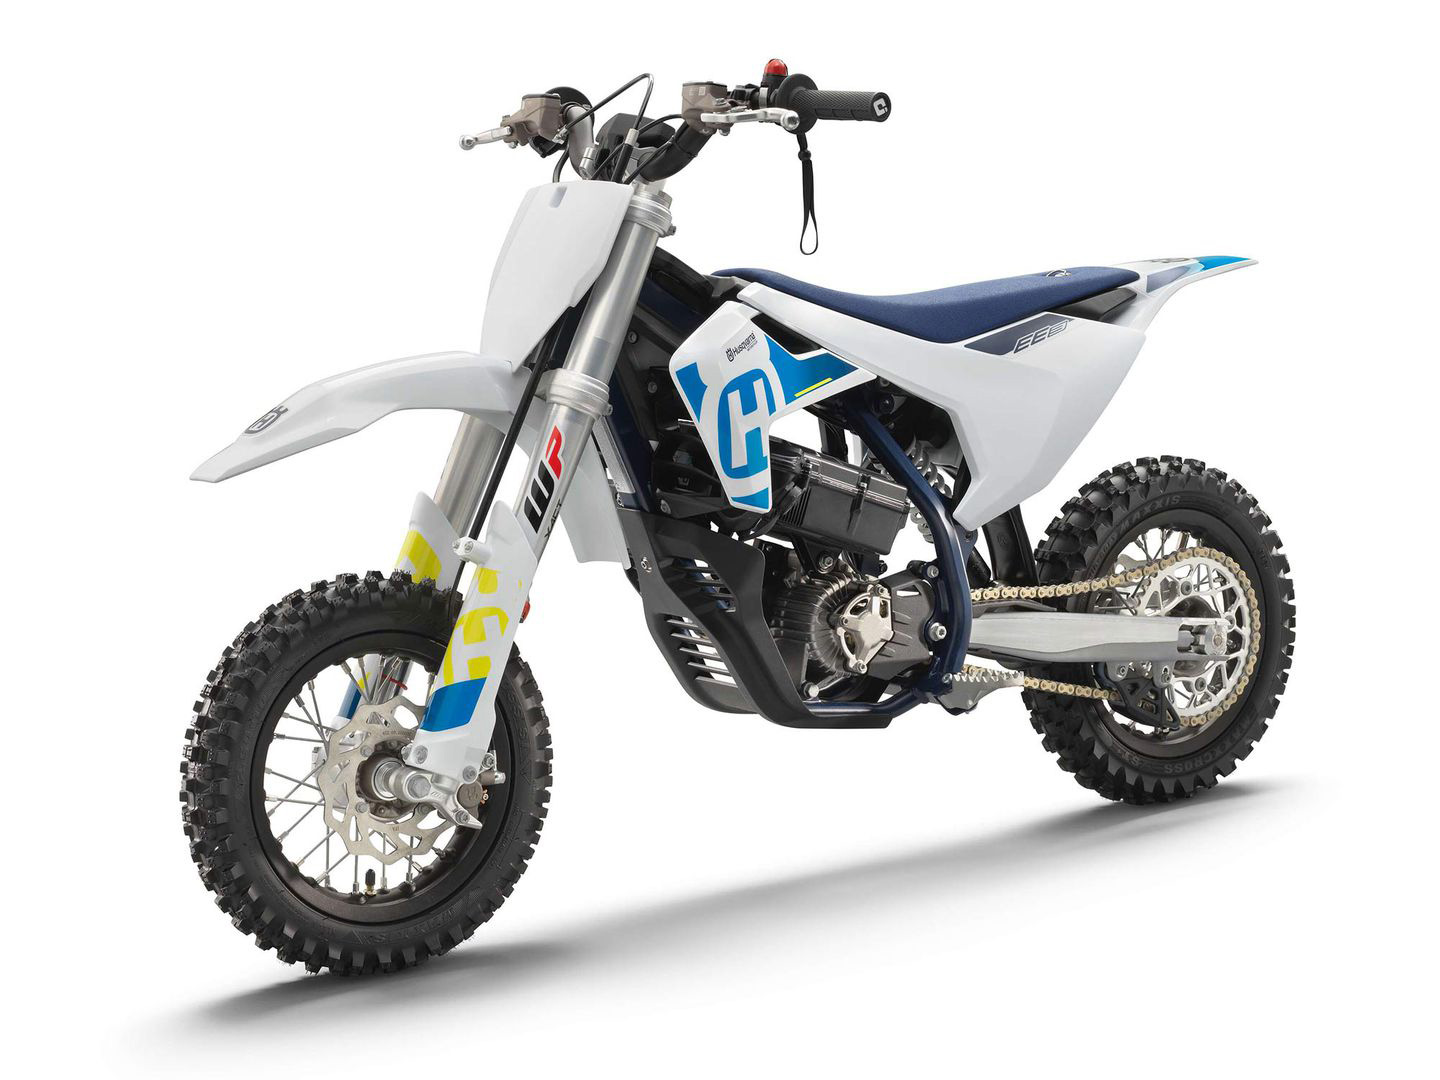 Best Electric Motorcycle for Teenagers